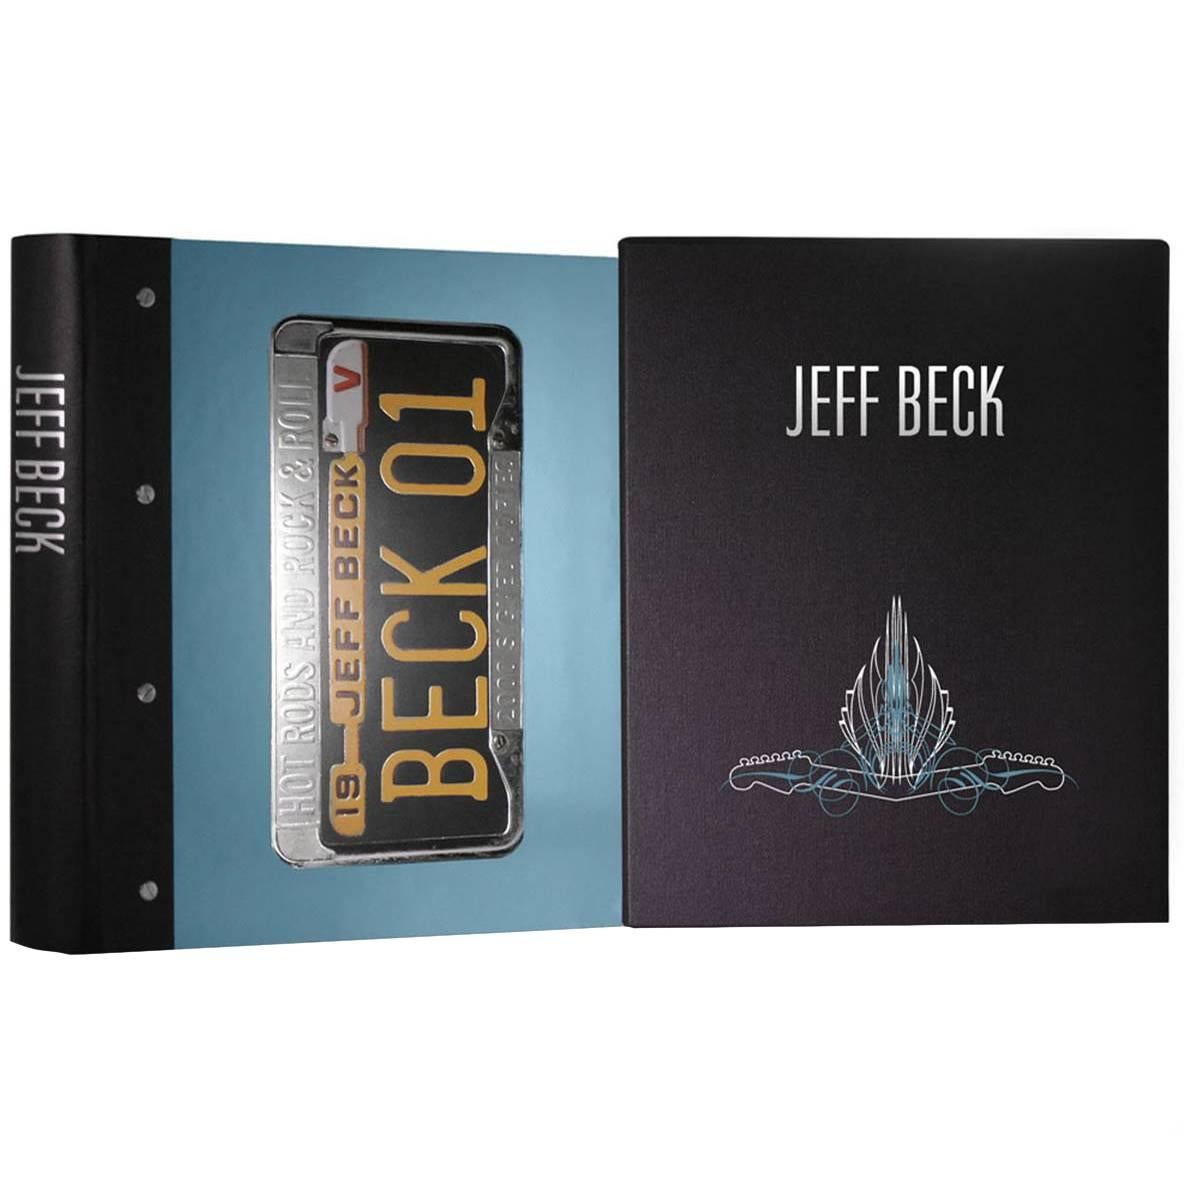 BECK01 by Jeff Beck Signed, Limited Edition Book